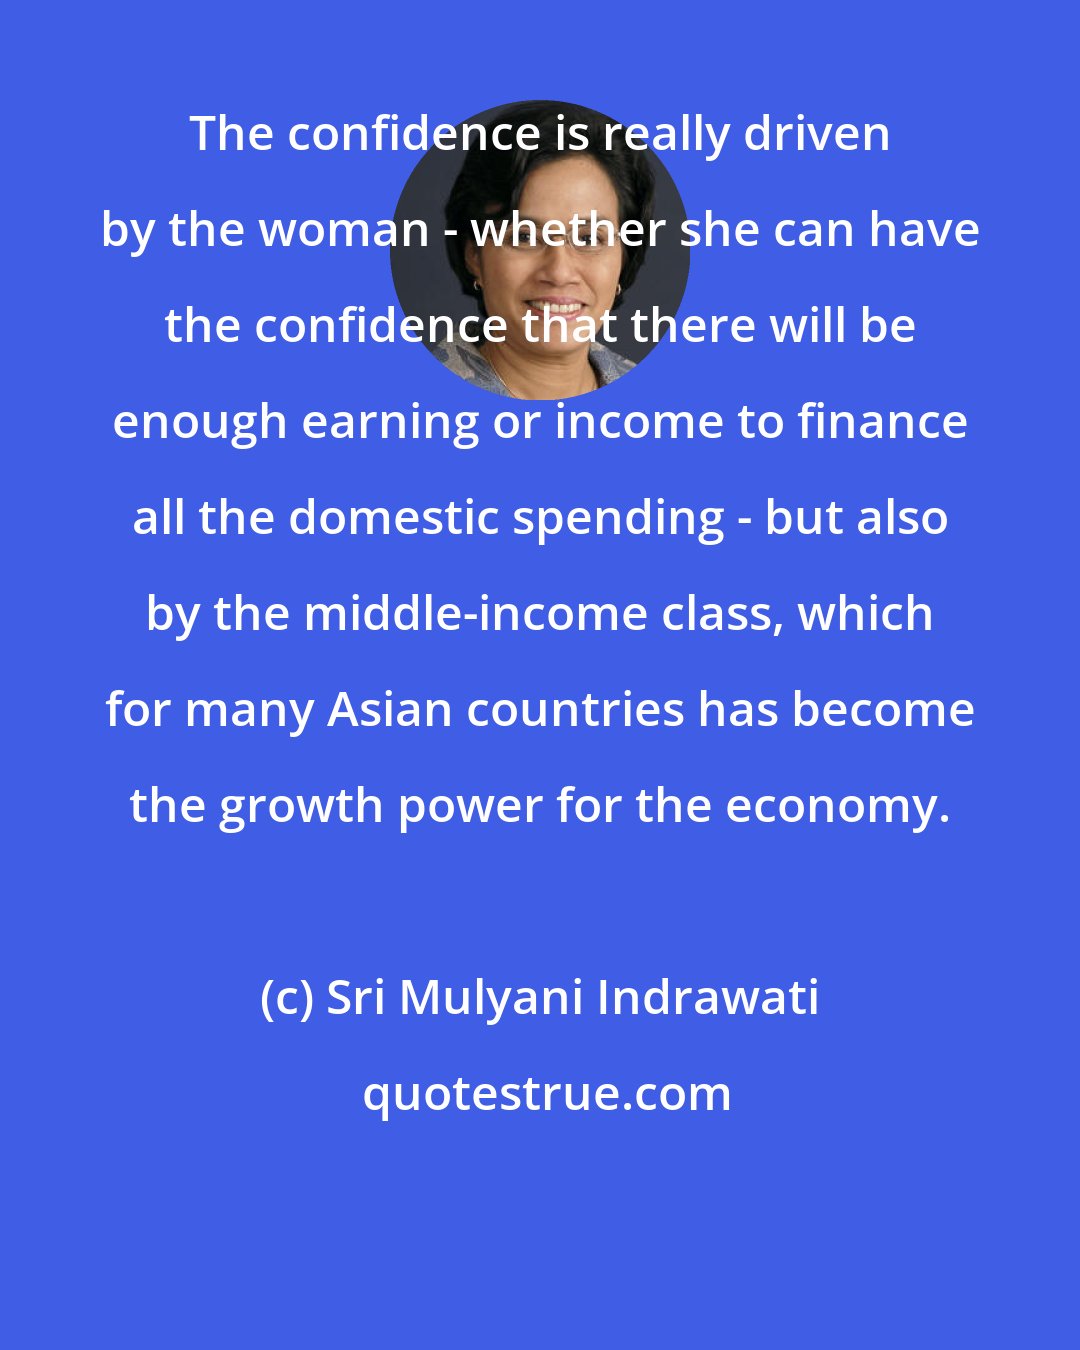 Sri Mulyani Indrawati: The confidence is really driven by the woman - whether she can have the confidence that there will be enough earning or income to finance all the domestic spending - but also by the middle-income class, which for many Asian countries has become the growth power for the economy.